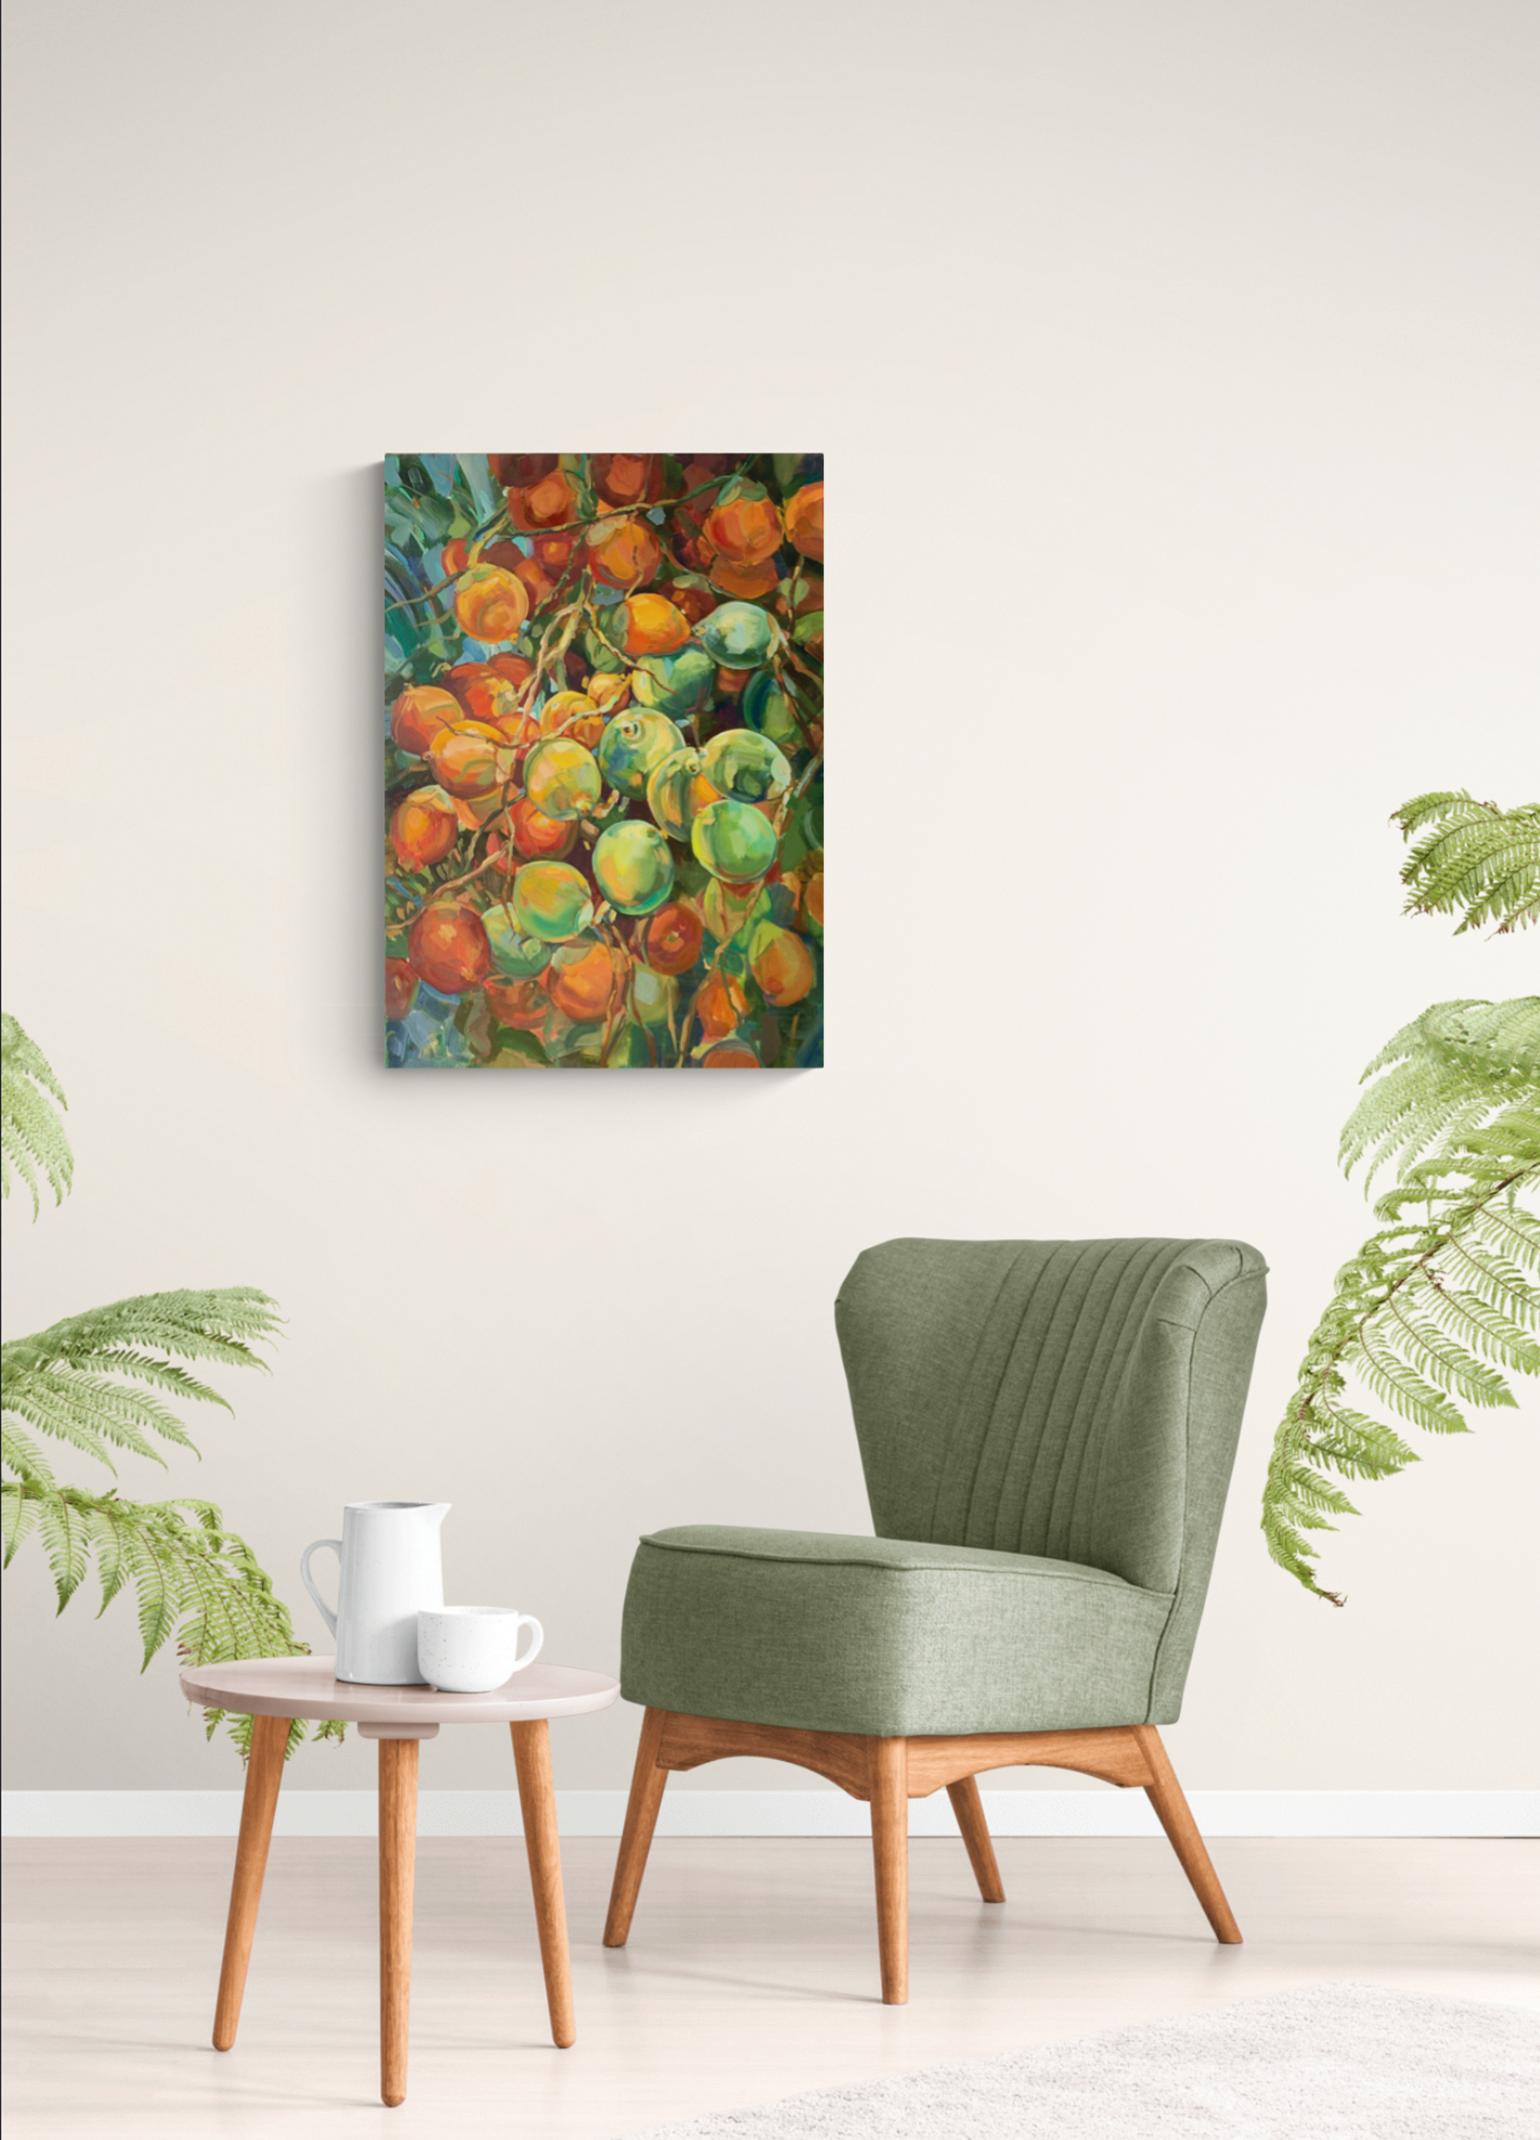 Coconut splendor . Colourful Tropical Nature . Original oil painting on canvas - Painting by Momalyu Liubov